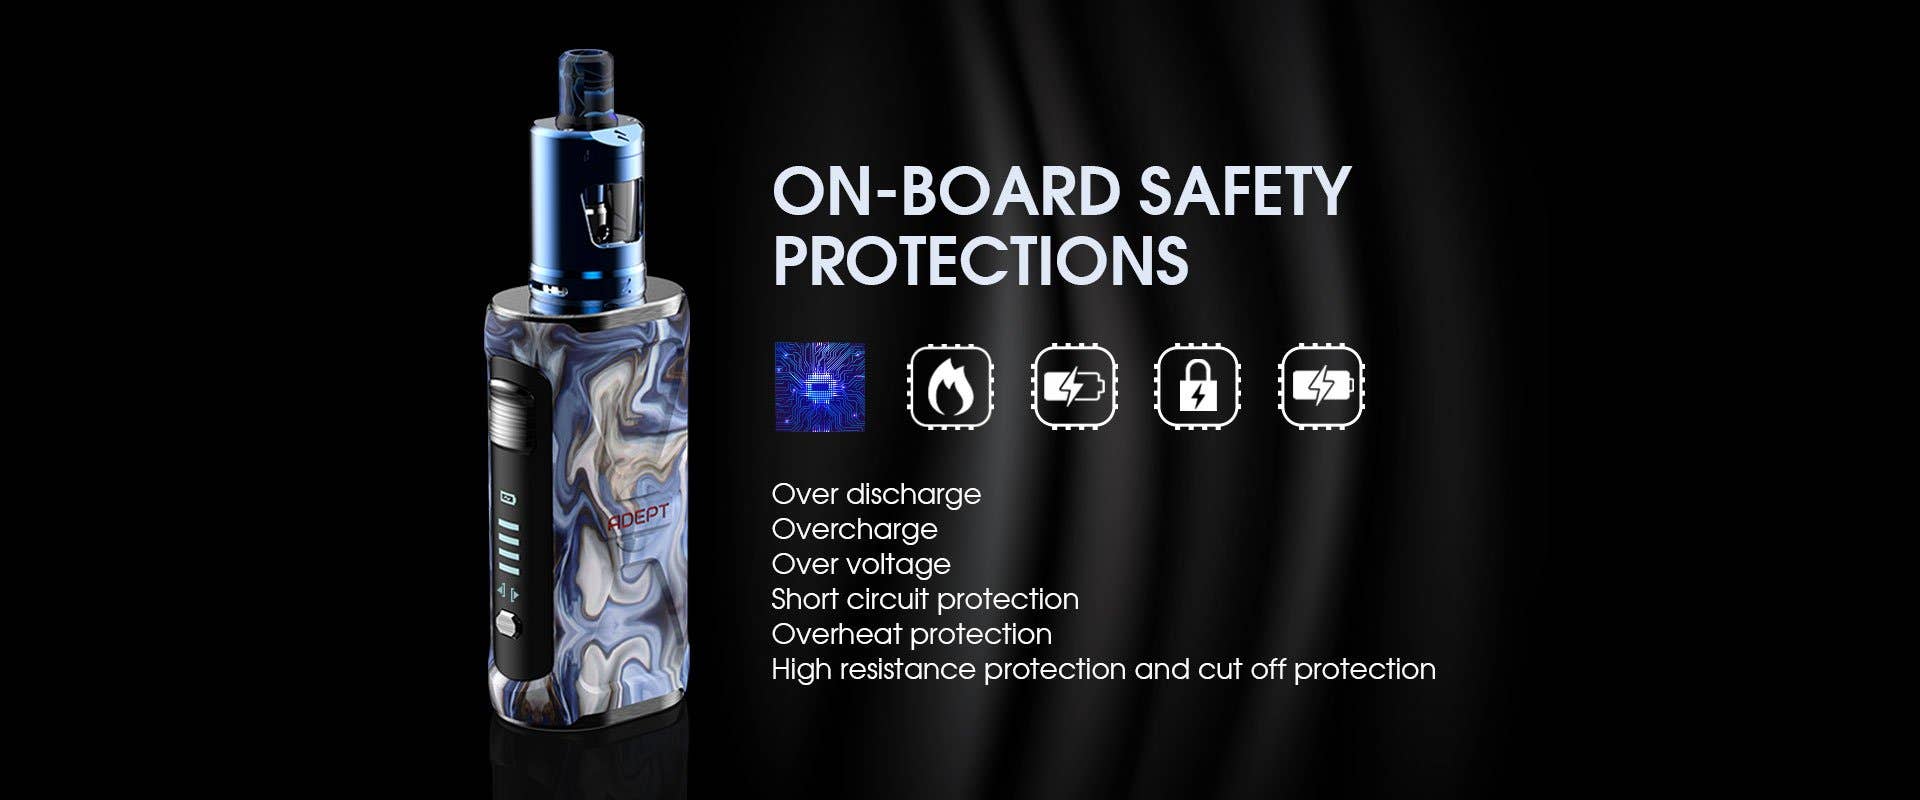 The Innokin Adept Zlide Kit features built in safety features